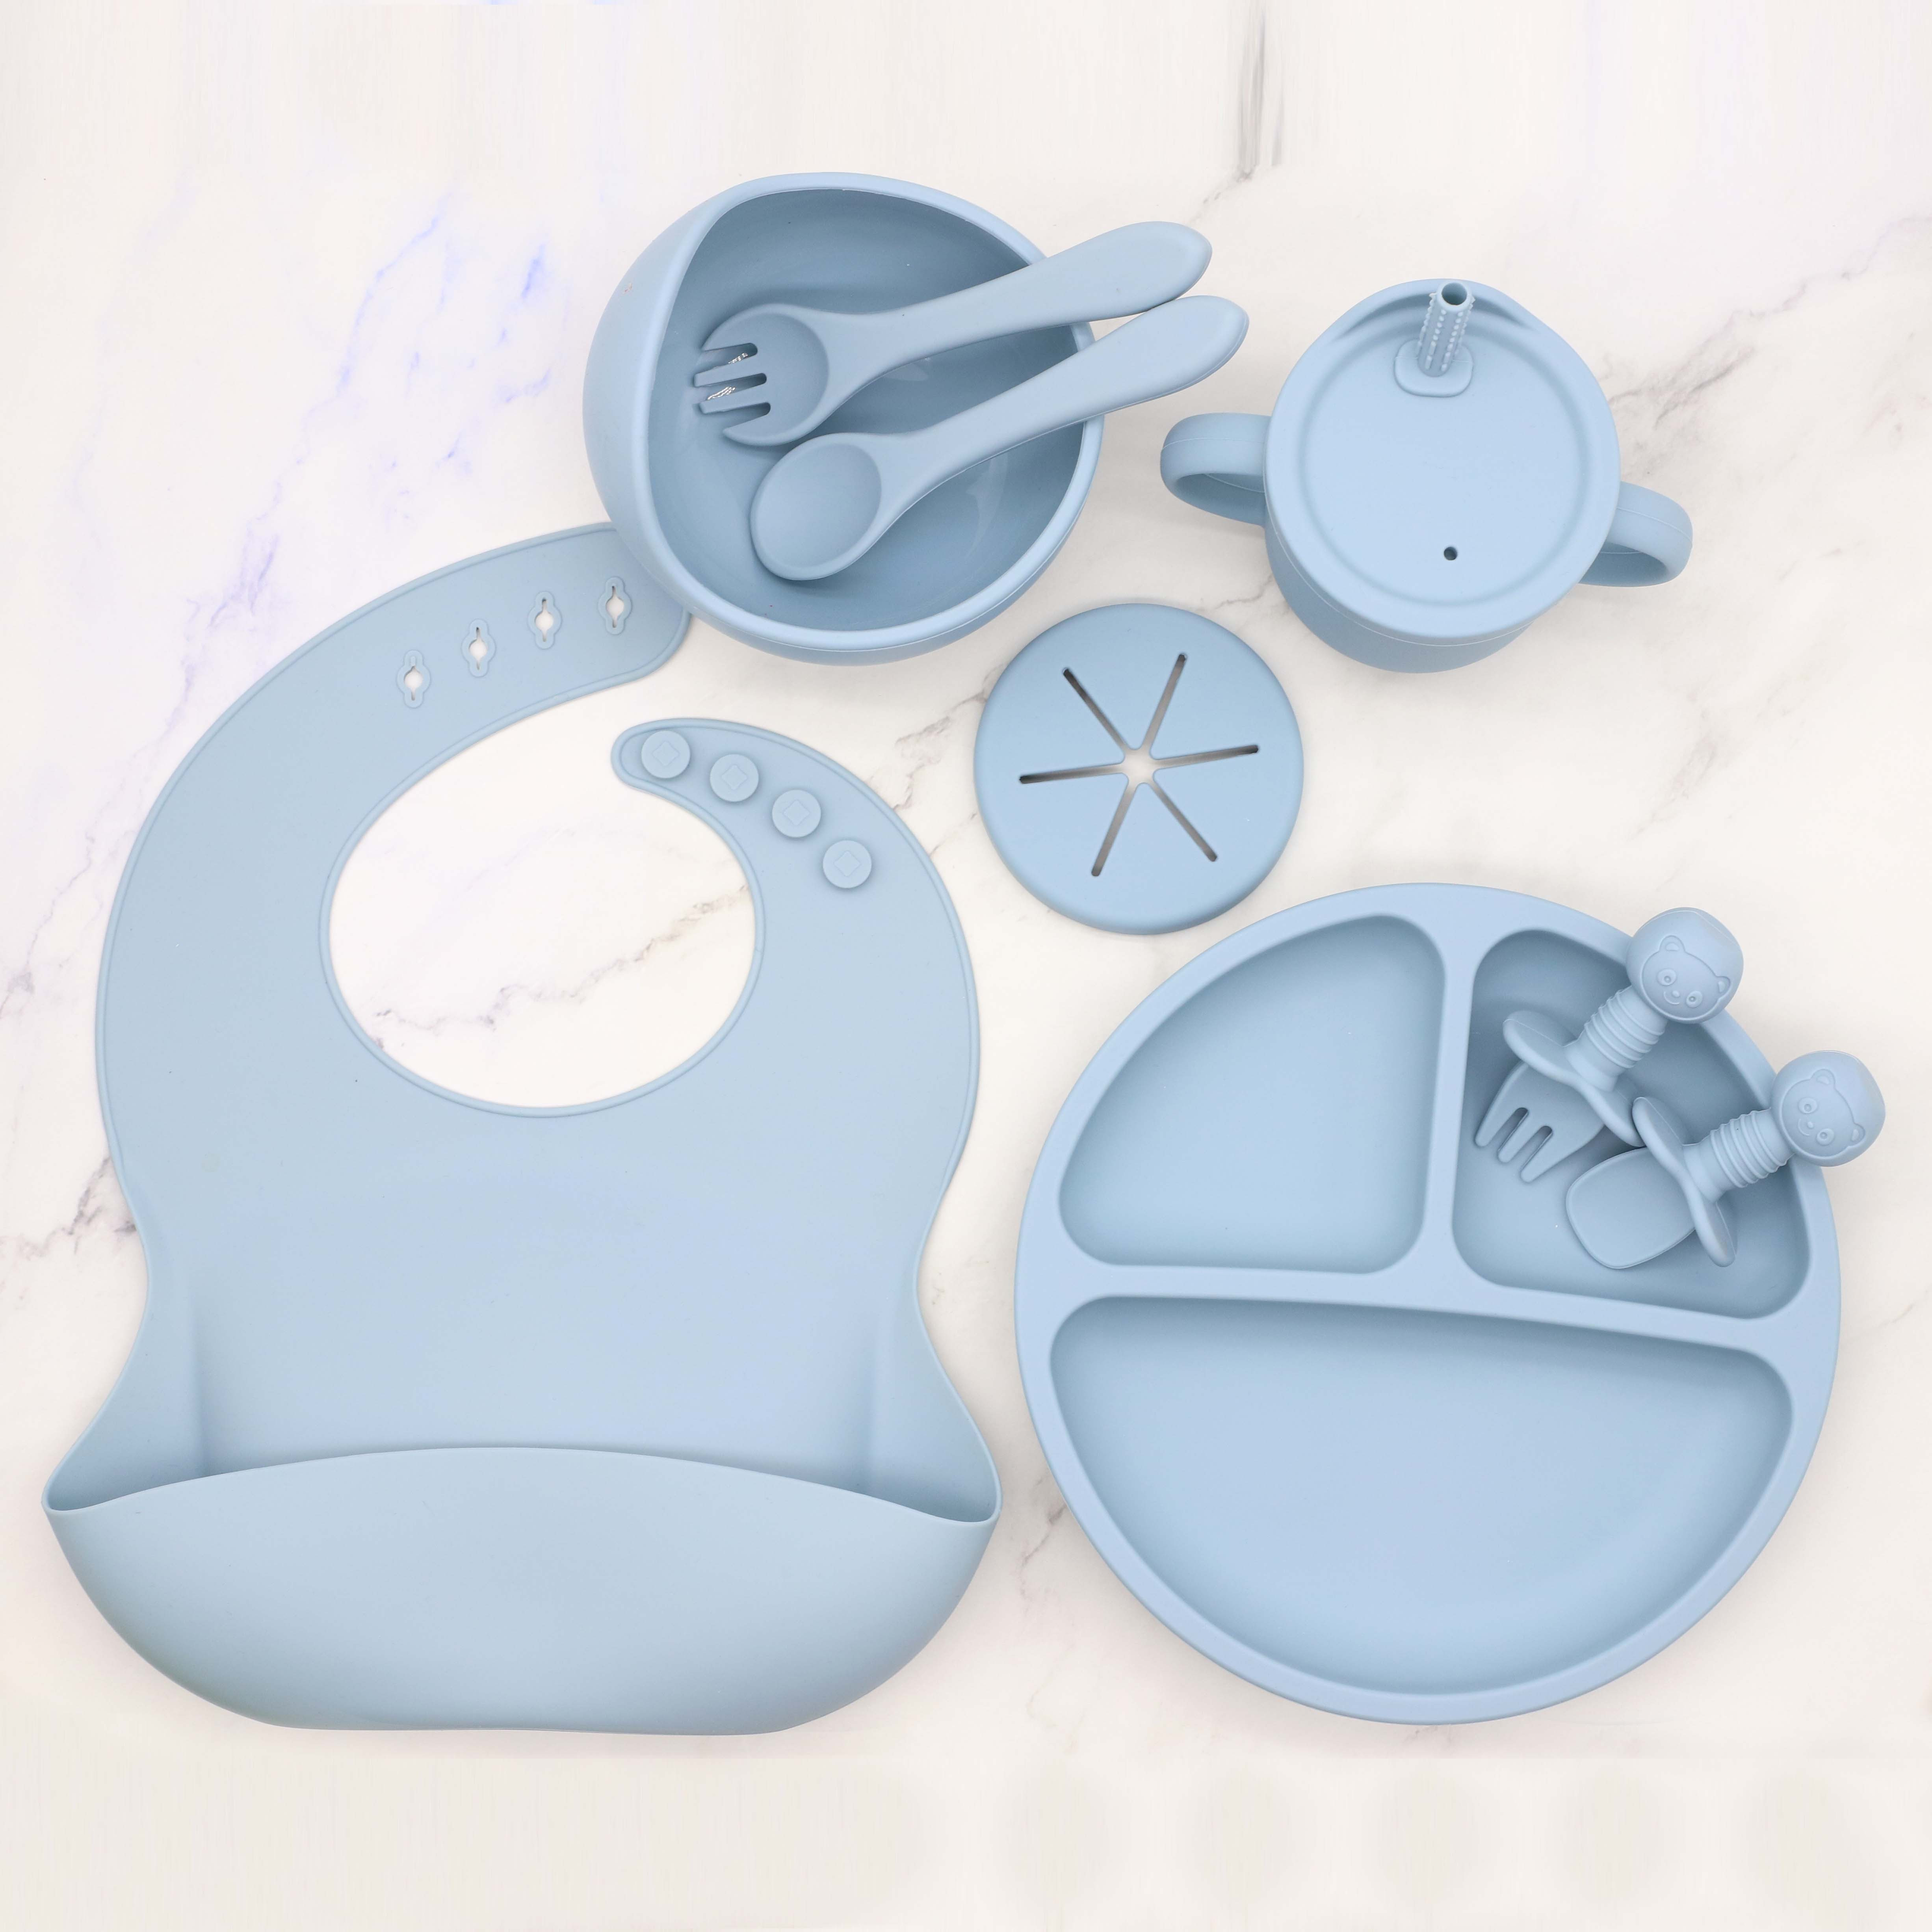 odoe OAdoe Baby Led Weaning Supplies, Silicone Baby Feeding Set Suction  Bowl Divided Plate Bib cup Self Feeding Spoons - Toddler Bab